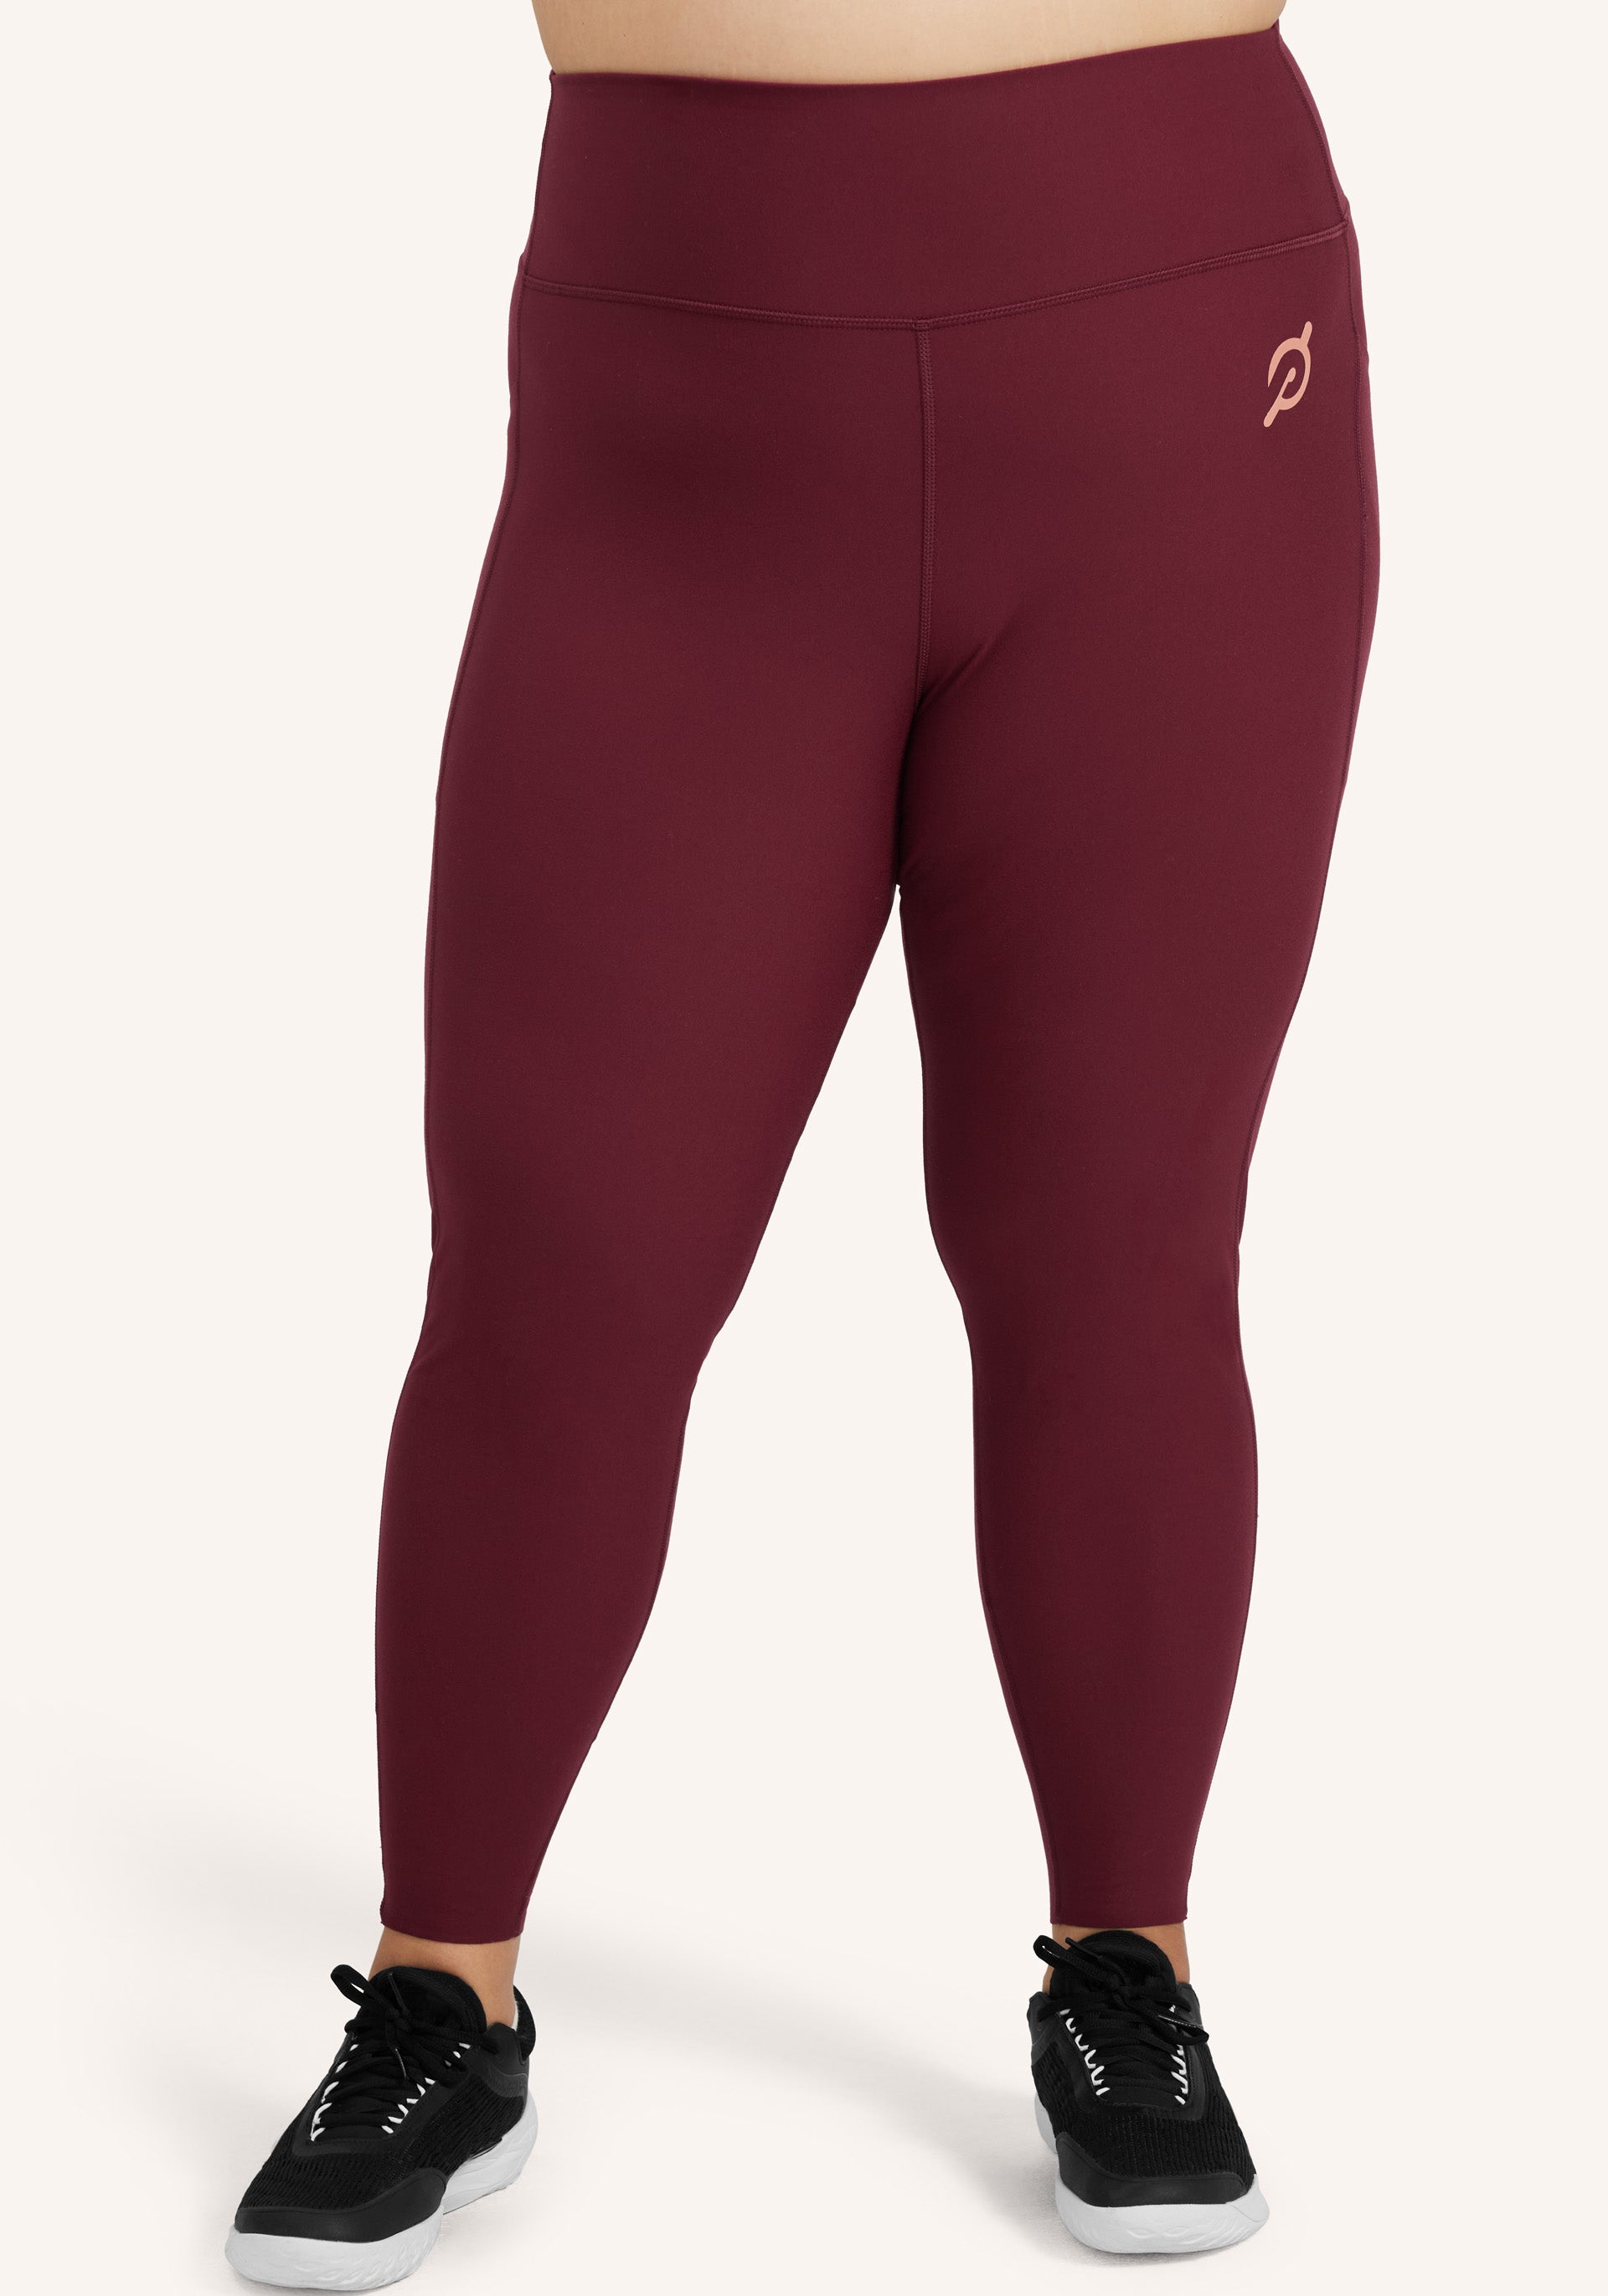 TNNZEET 3 Pack Plus Size Leggings with Pockets for Palestine